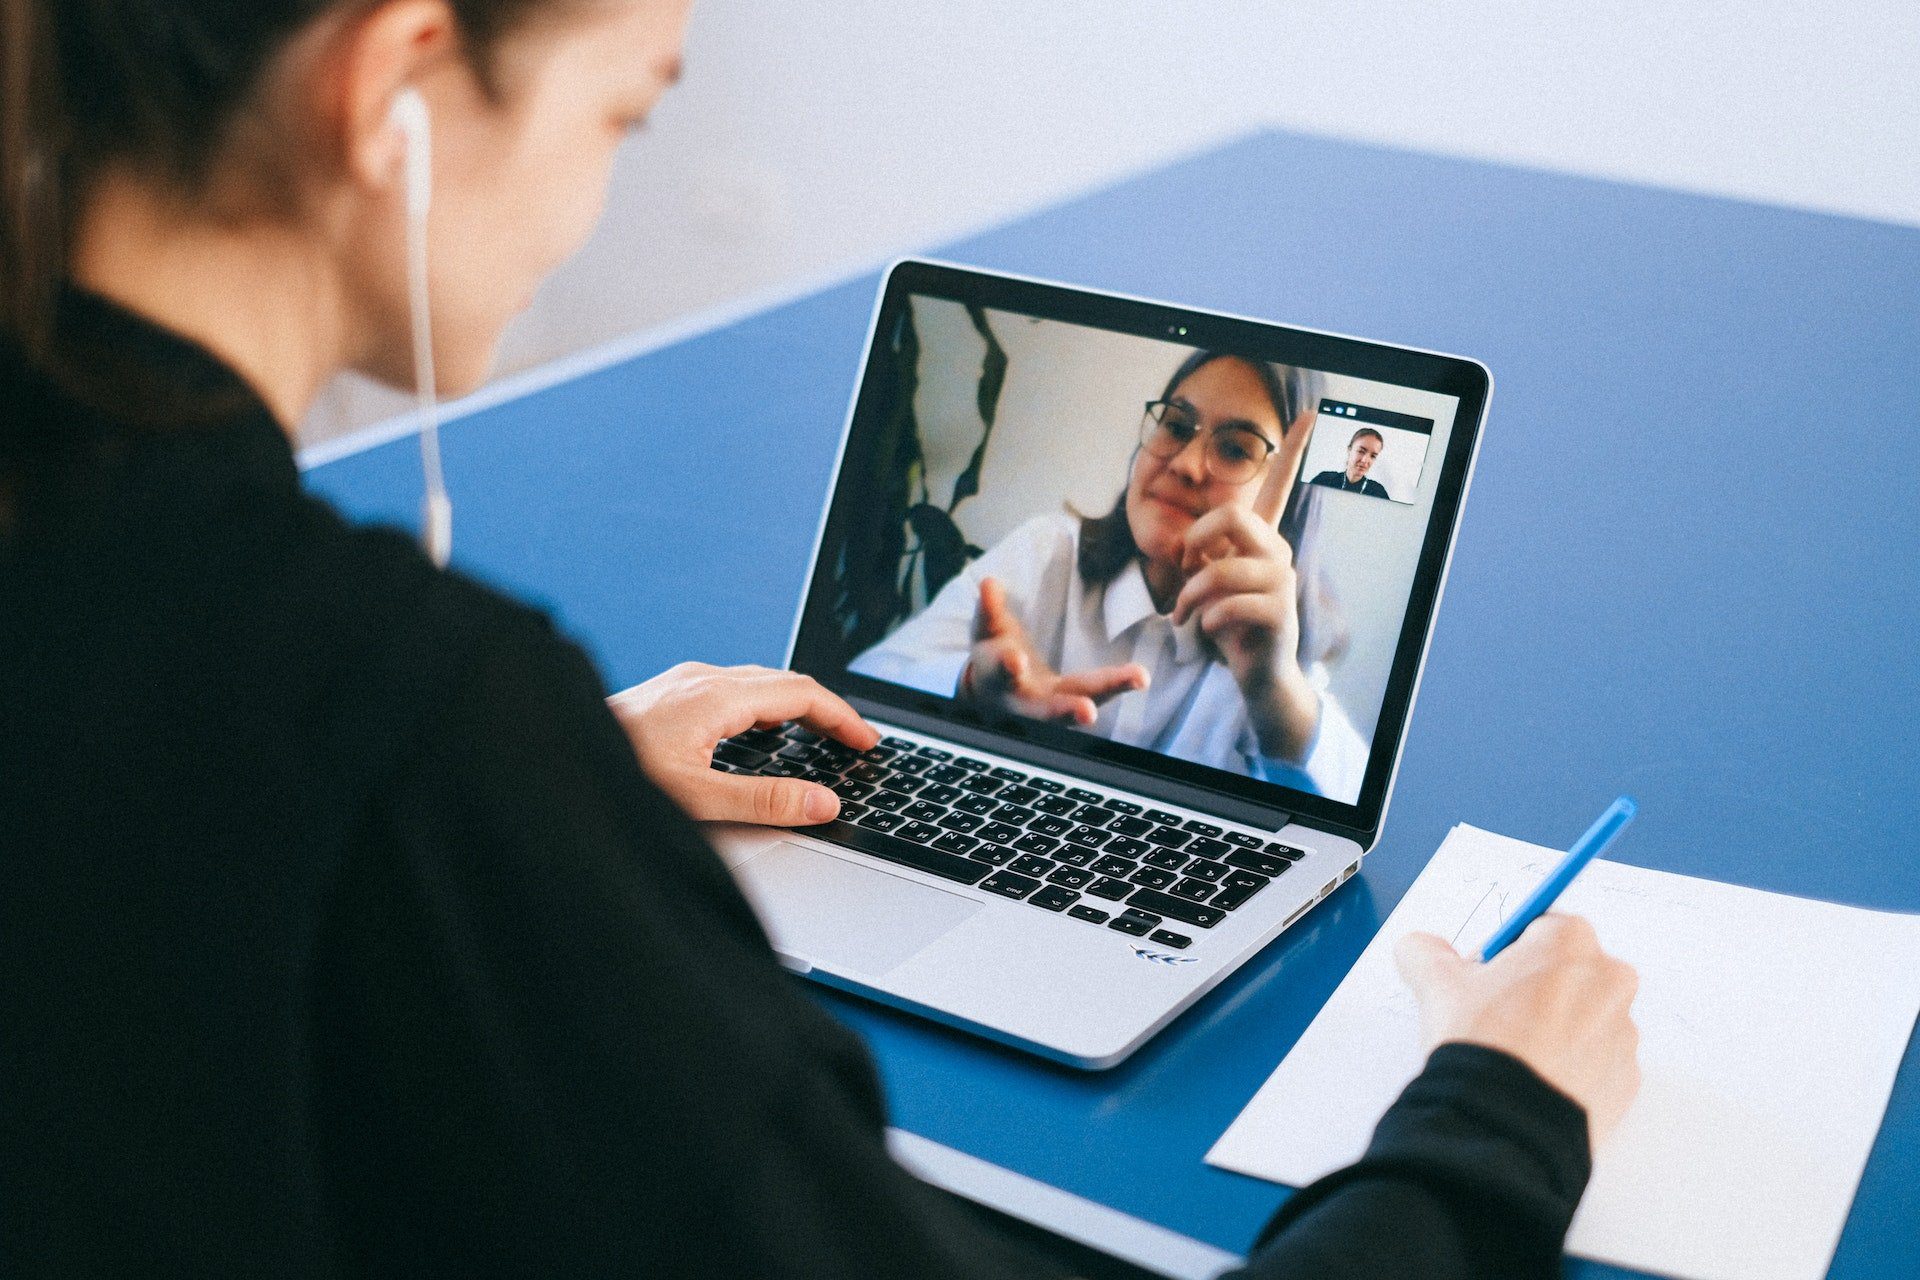 video conference between two people